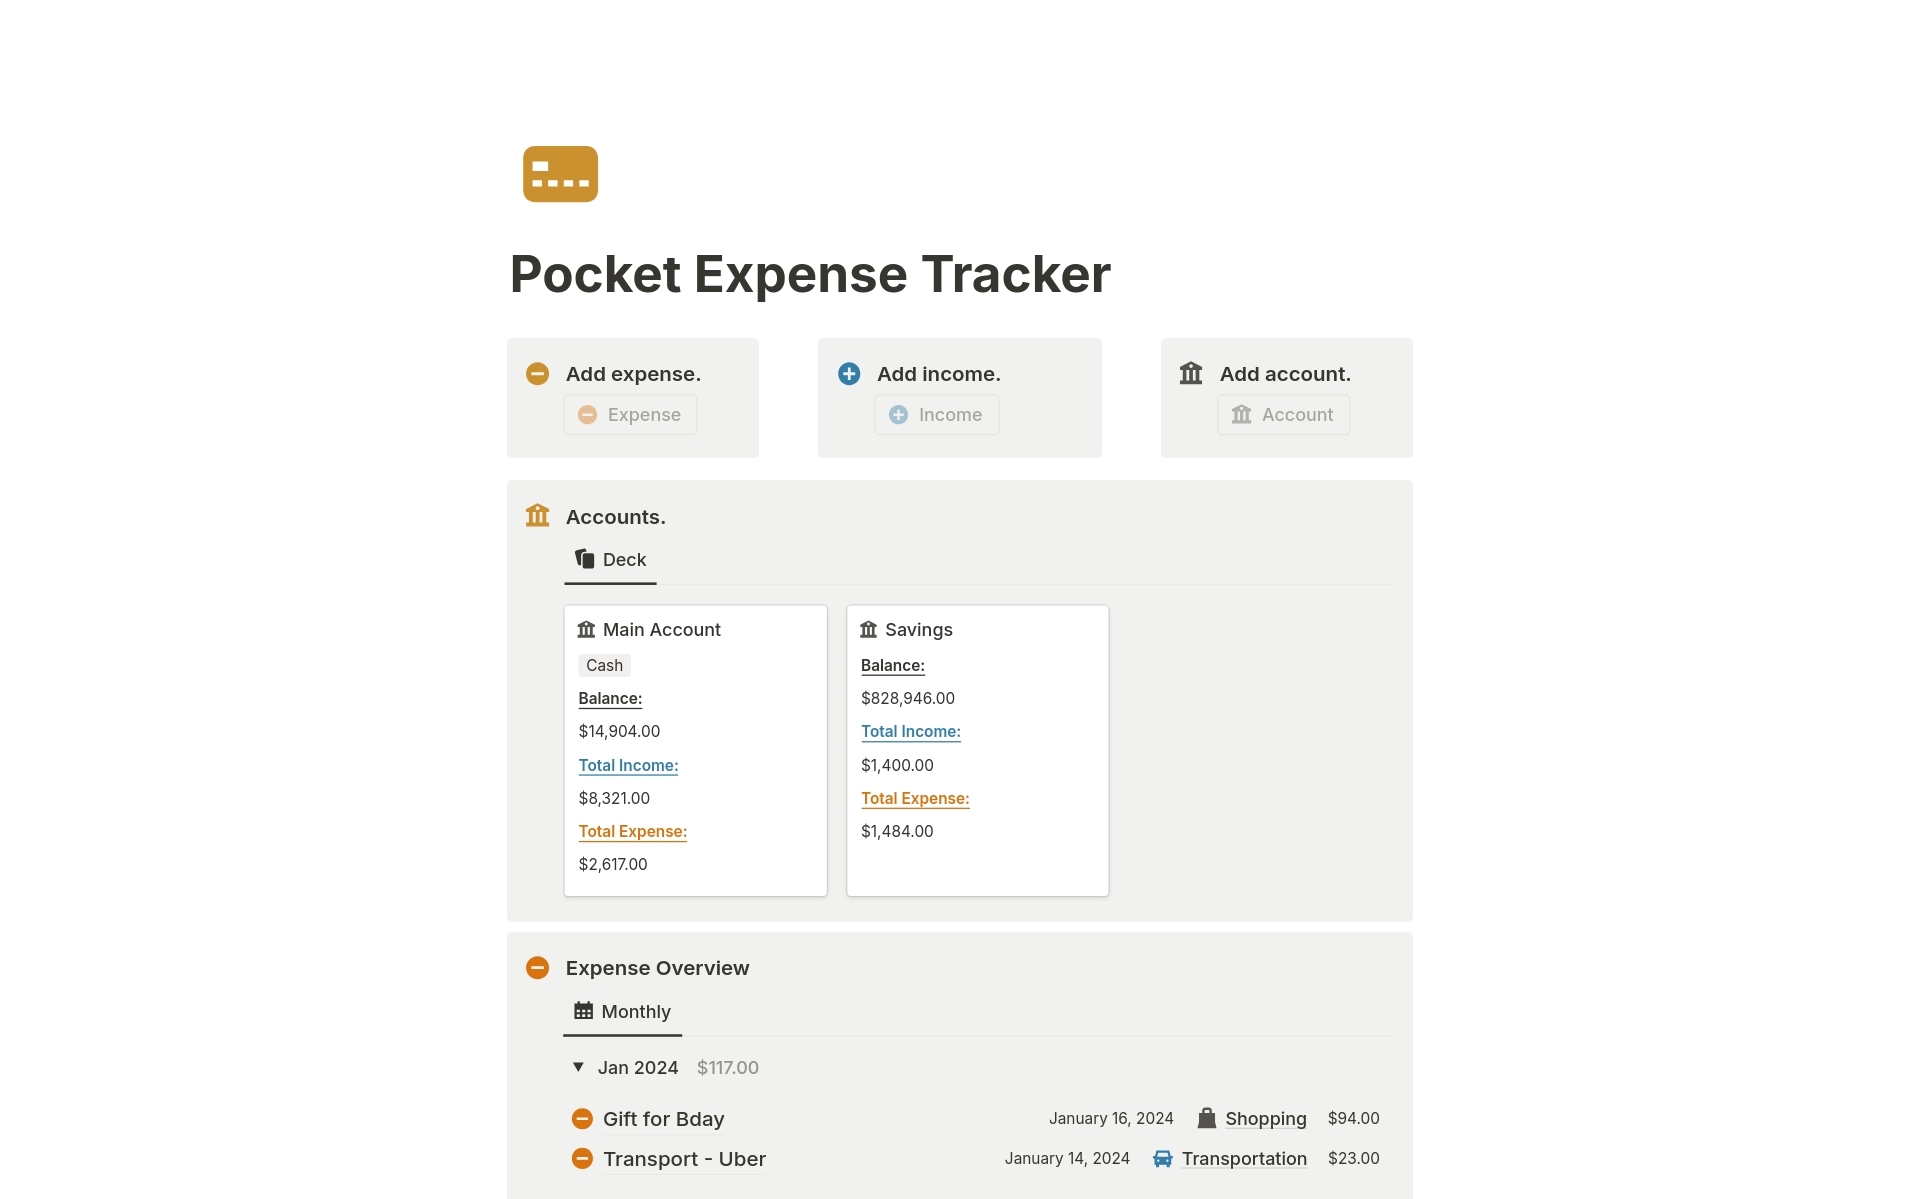 The Pocket Expense Tracker is a breath of fresh air in the world of finance trackers. By focusing purely on core finance tracking, you can effortlessly track your expenses on the day-to-day. It is a mobile-optimized daily expense tracker.